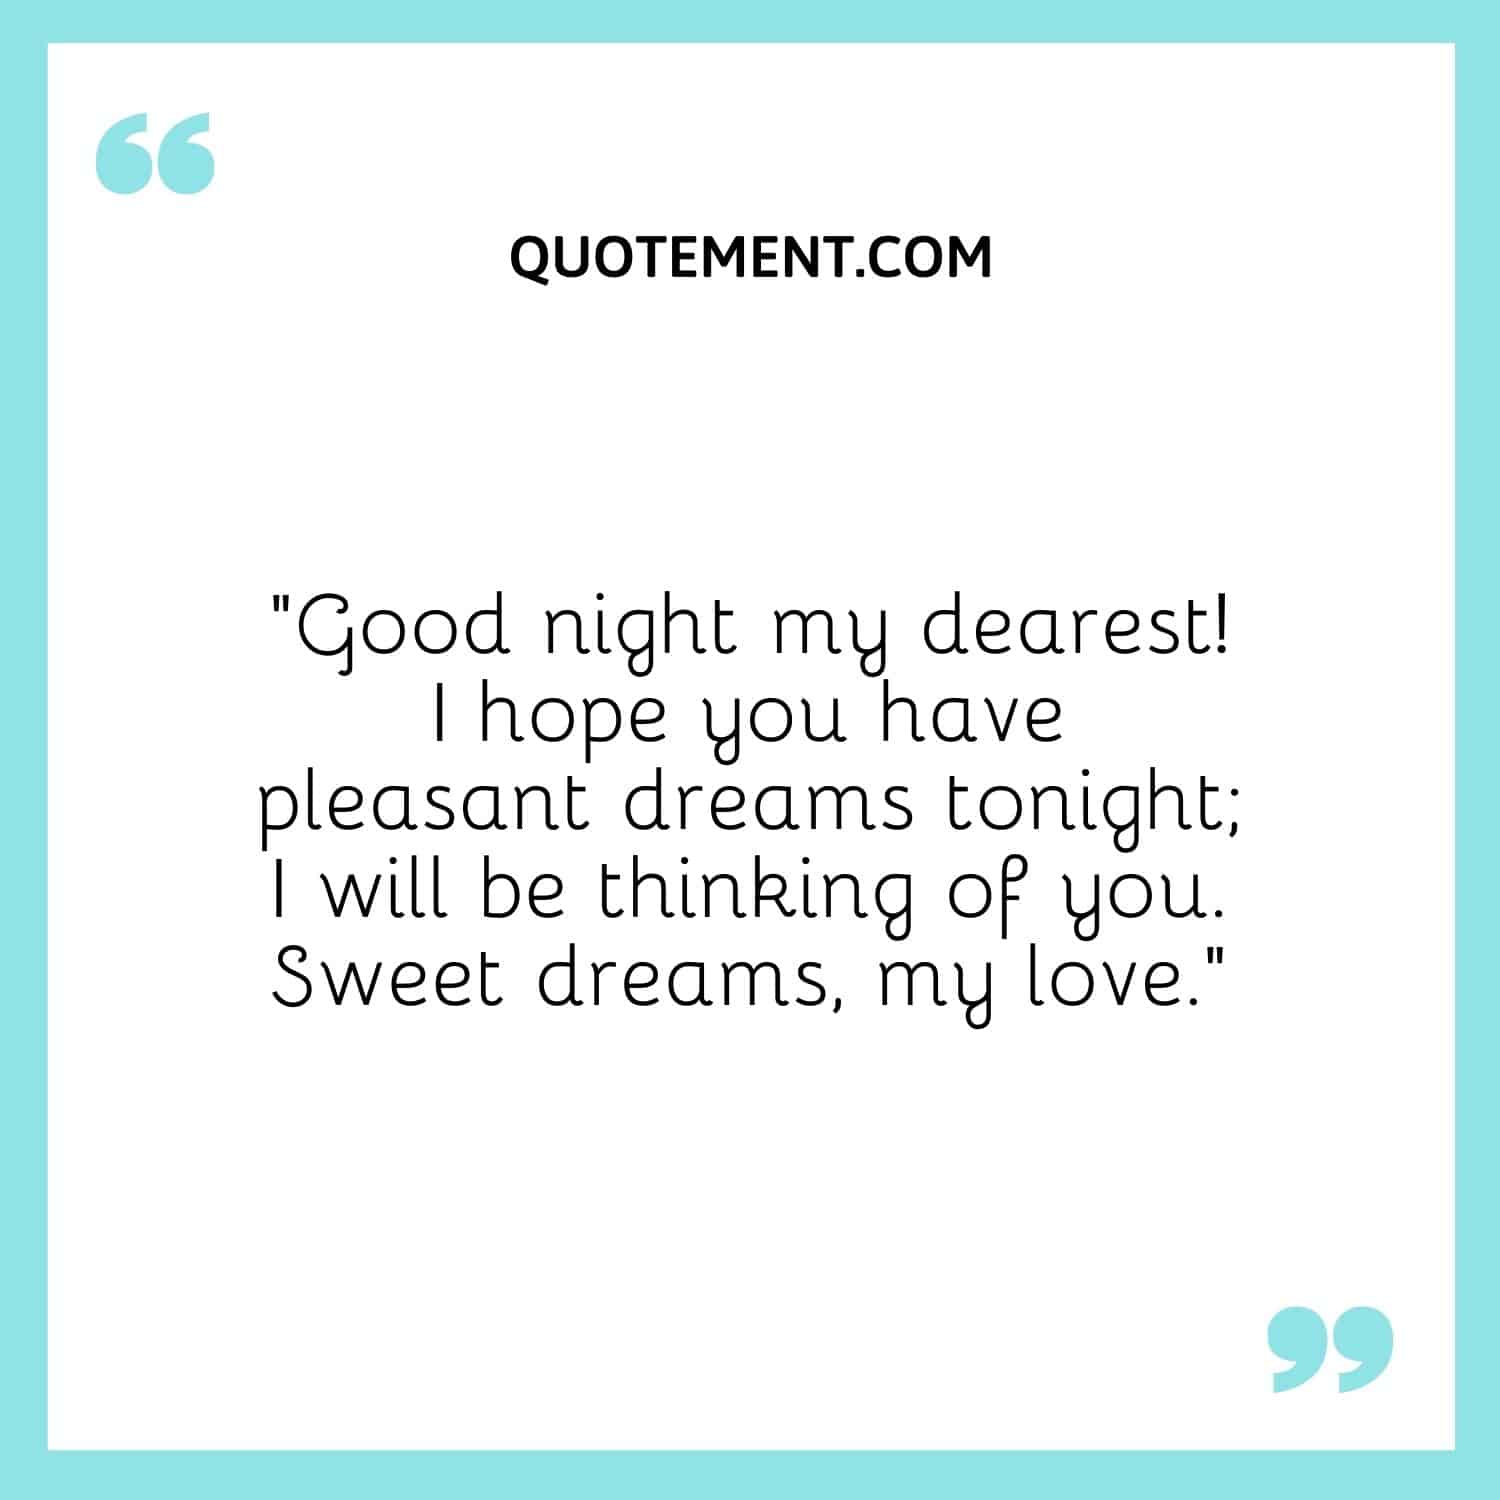 “Good night my dearest! I hope you have pleasant dreams tonight; I will be thinking of you. Sweet dreams, my love.”